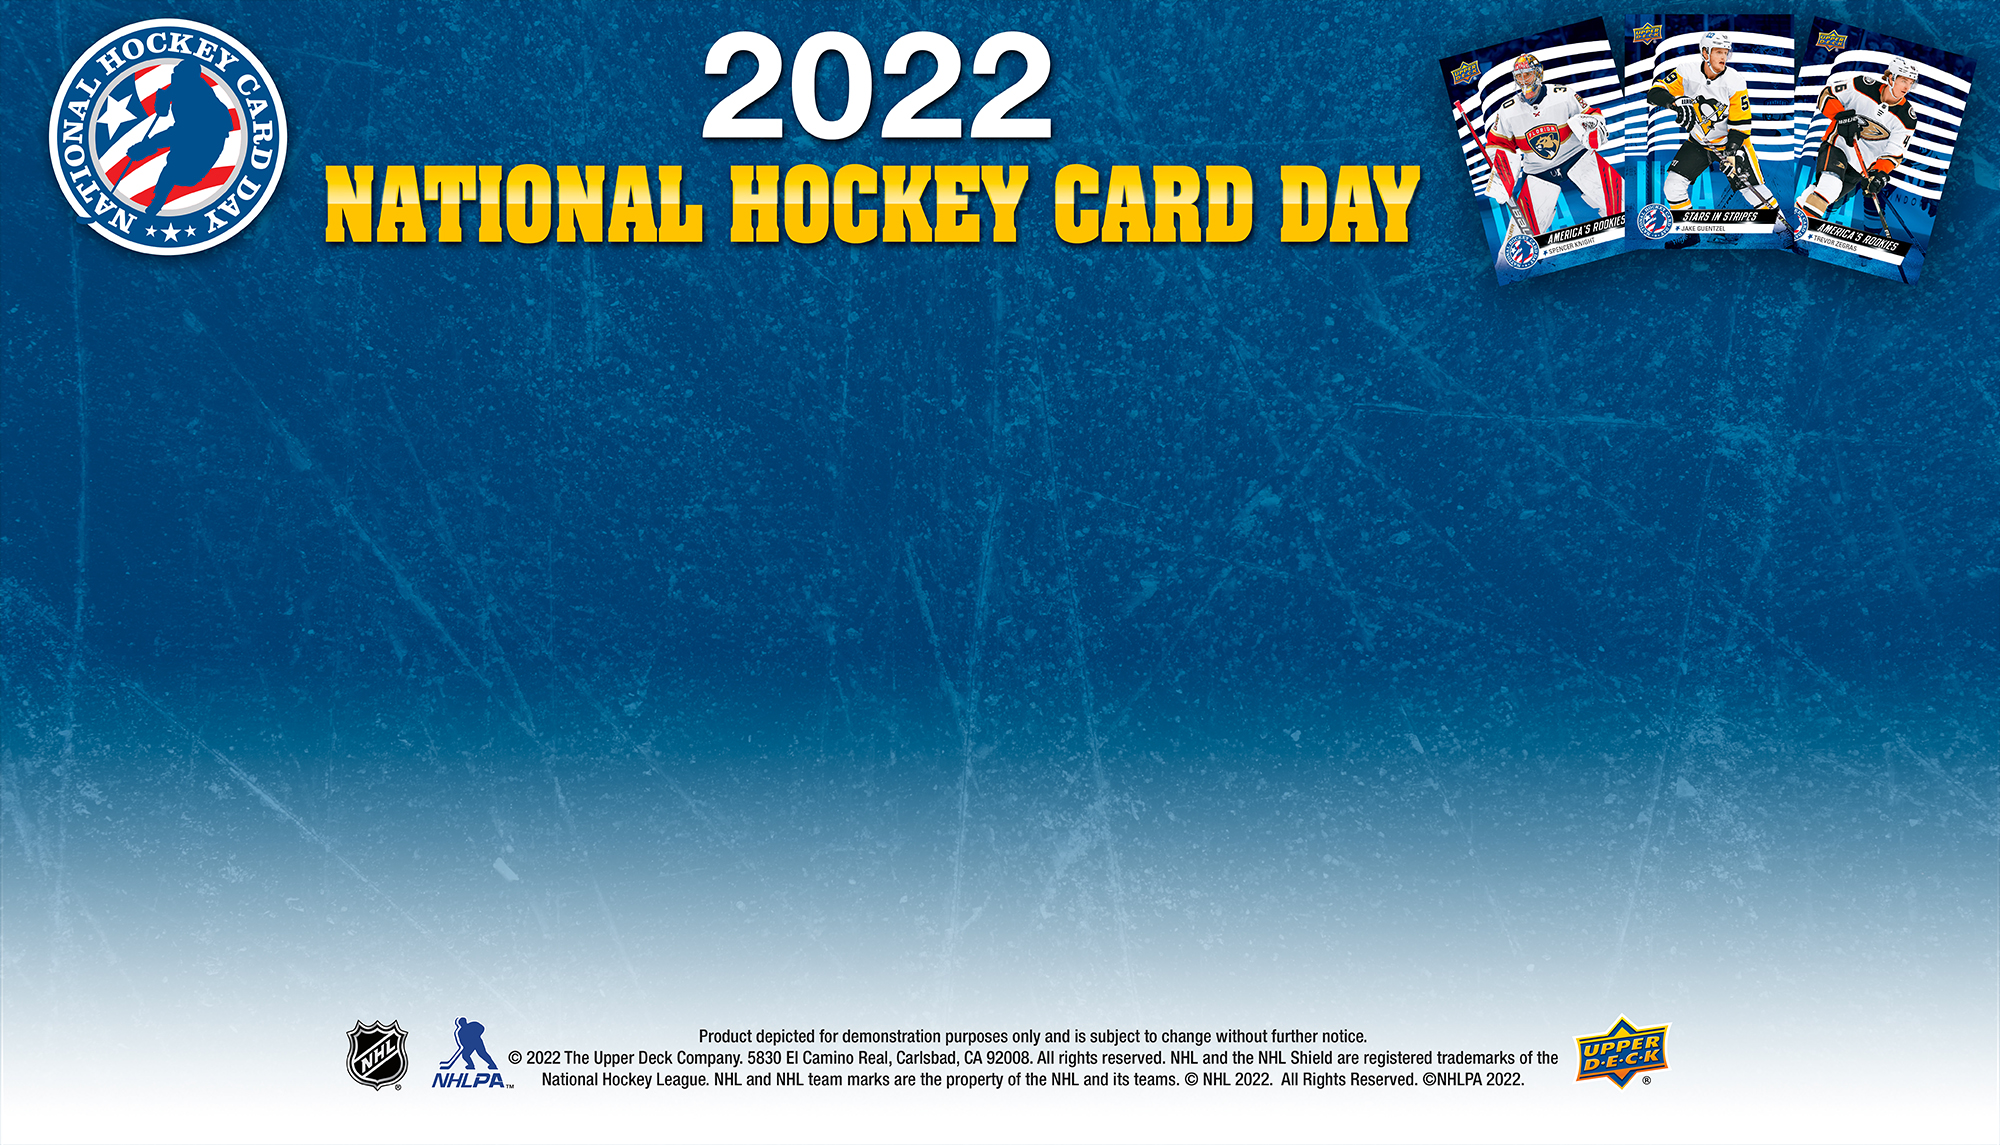 2022 National Hockey Card Day presented by Upper Deck, United States page